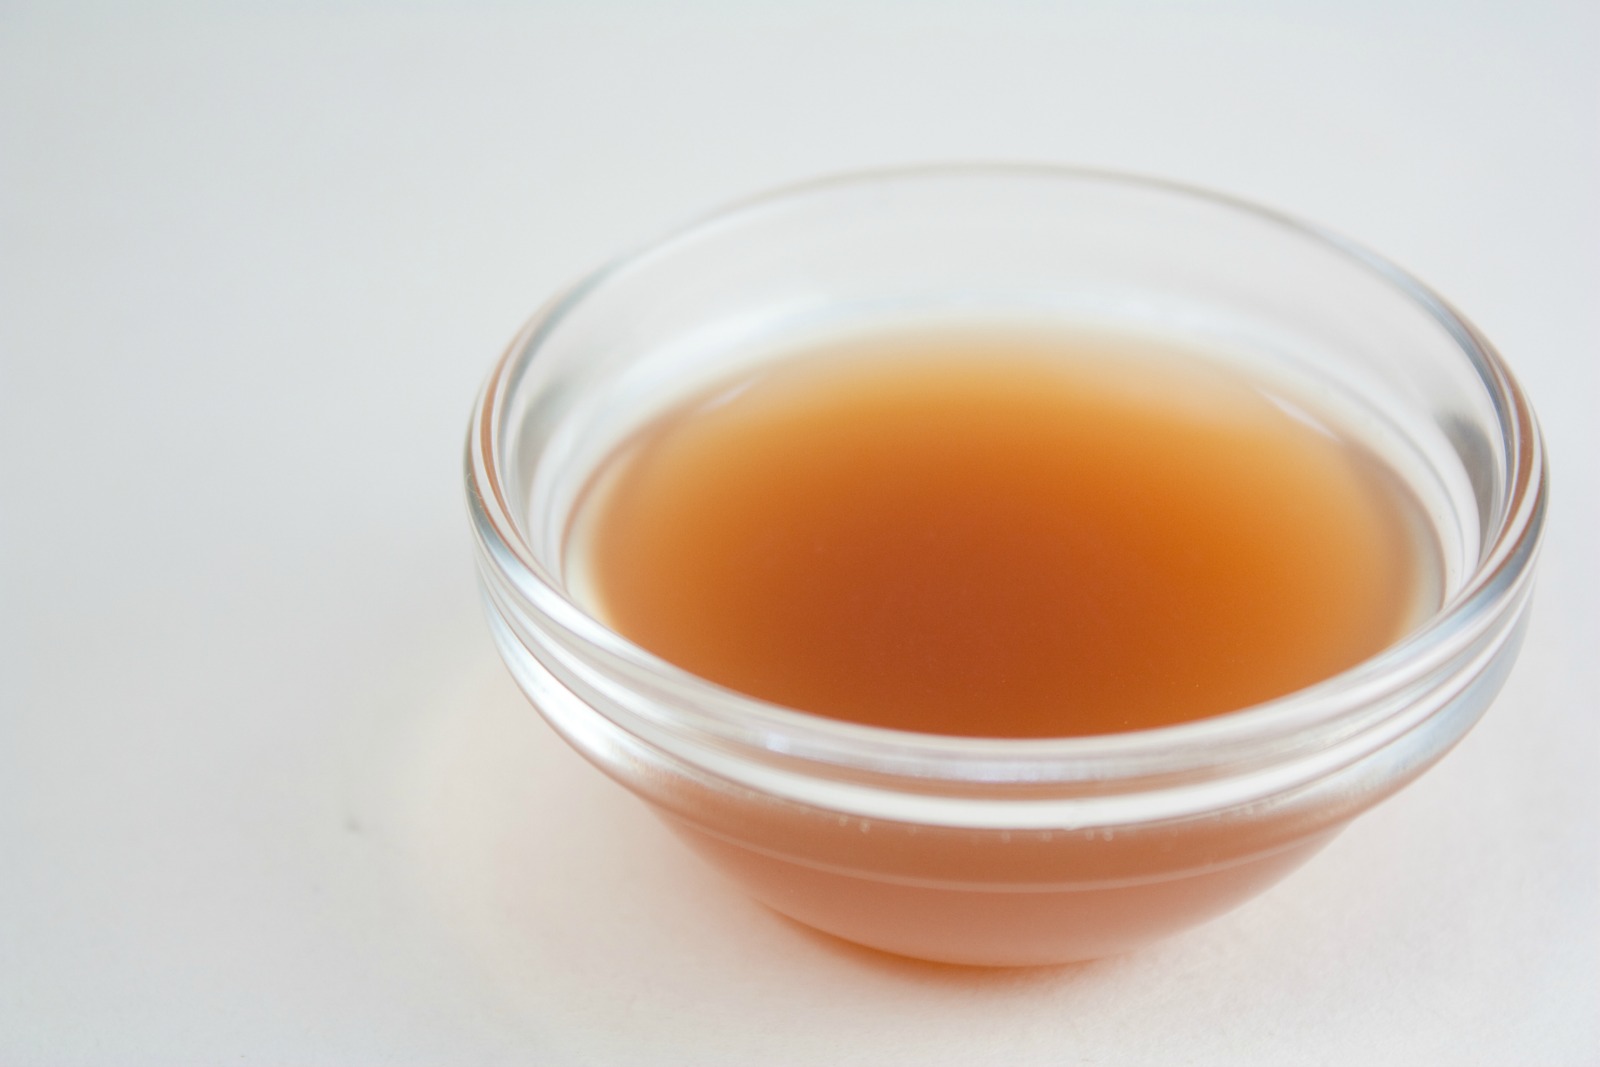 How to Use Apple Cider Vinegar to Relieve Inflammation